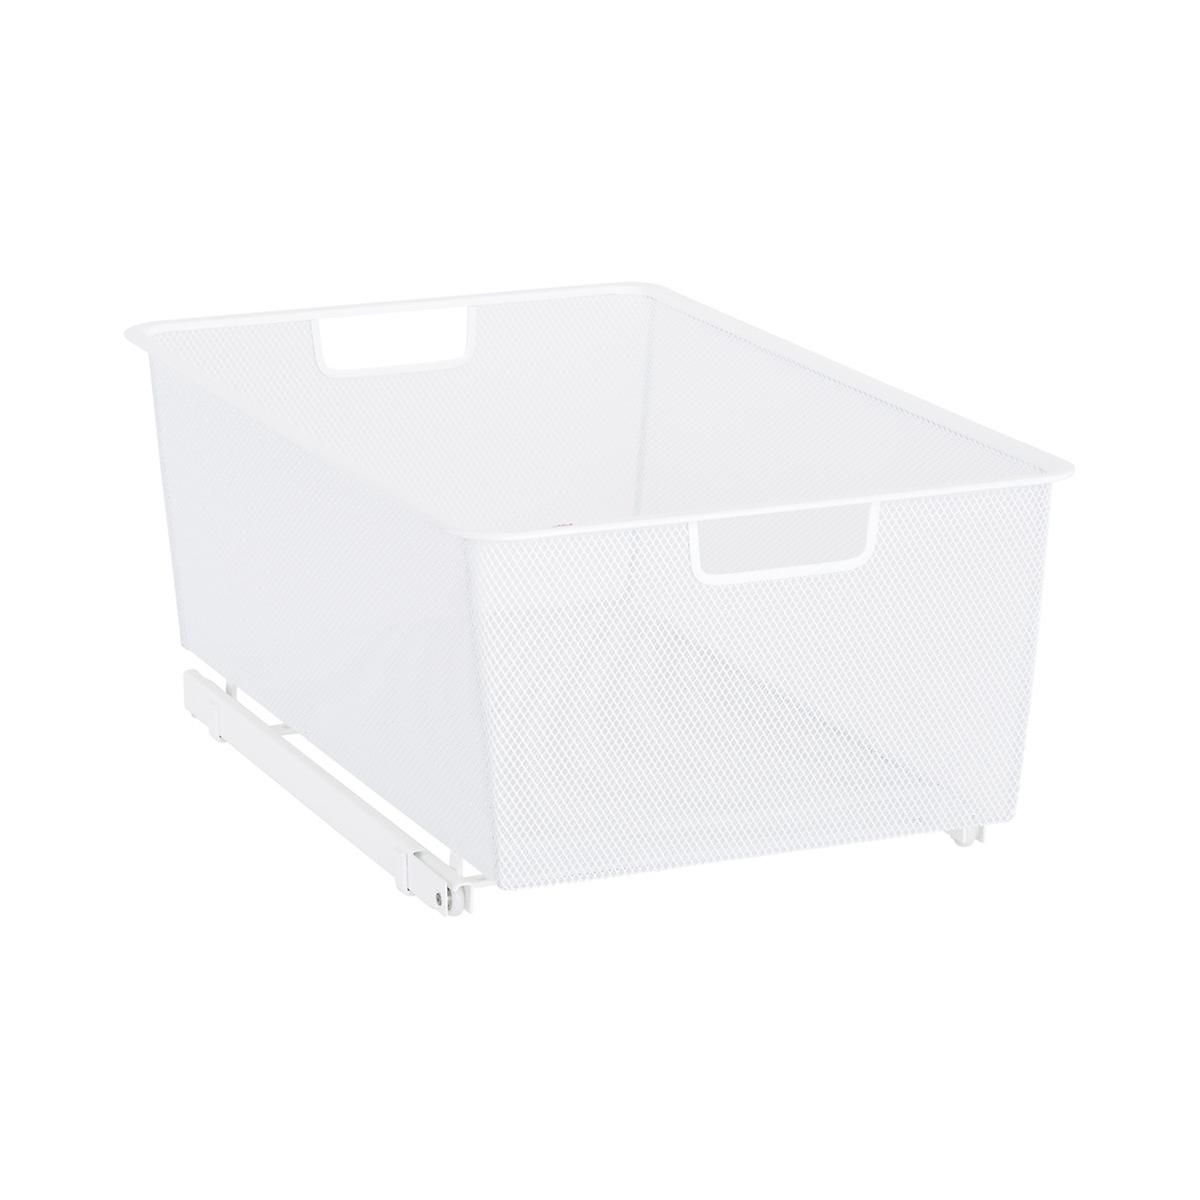 Elfa Narrow Pull-Out Cabinet Drawer White | The Container Store